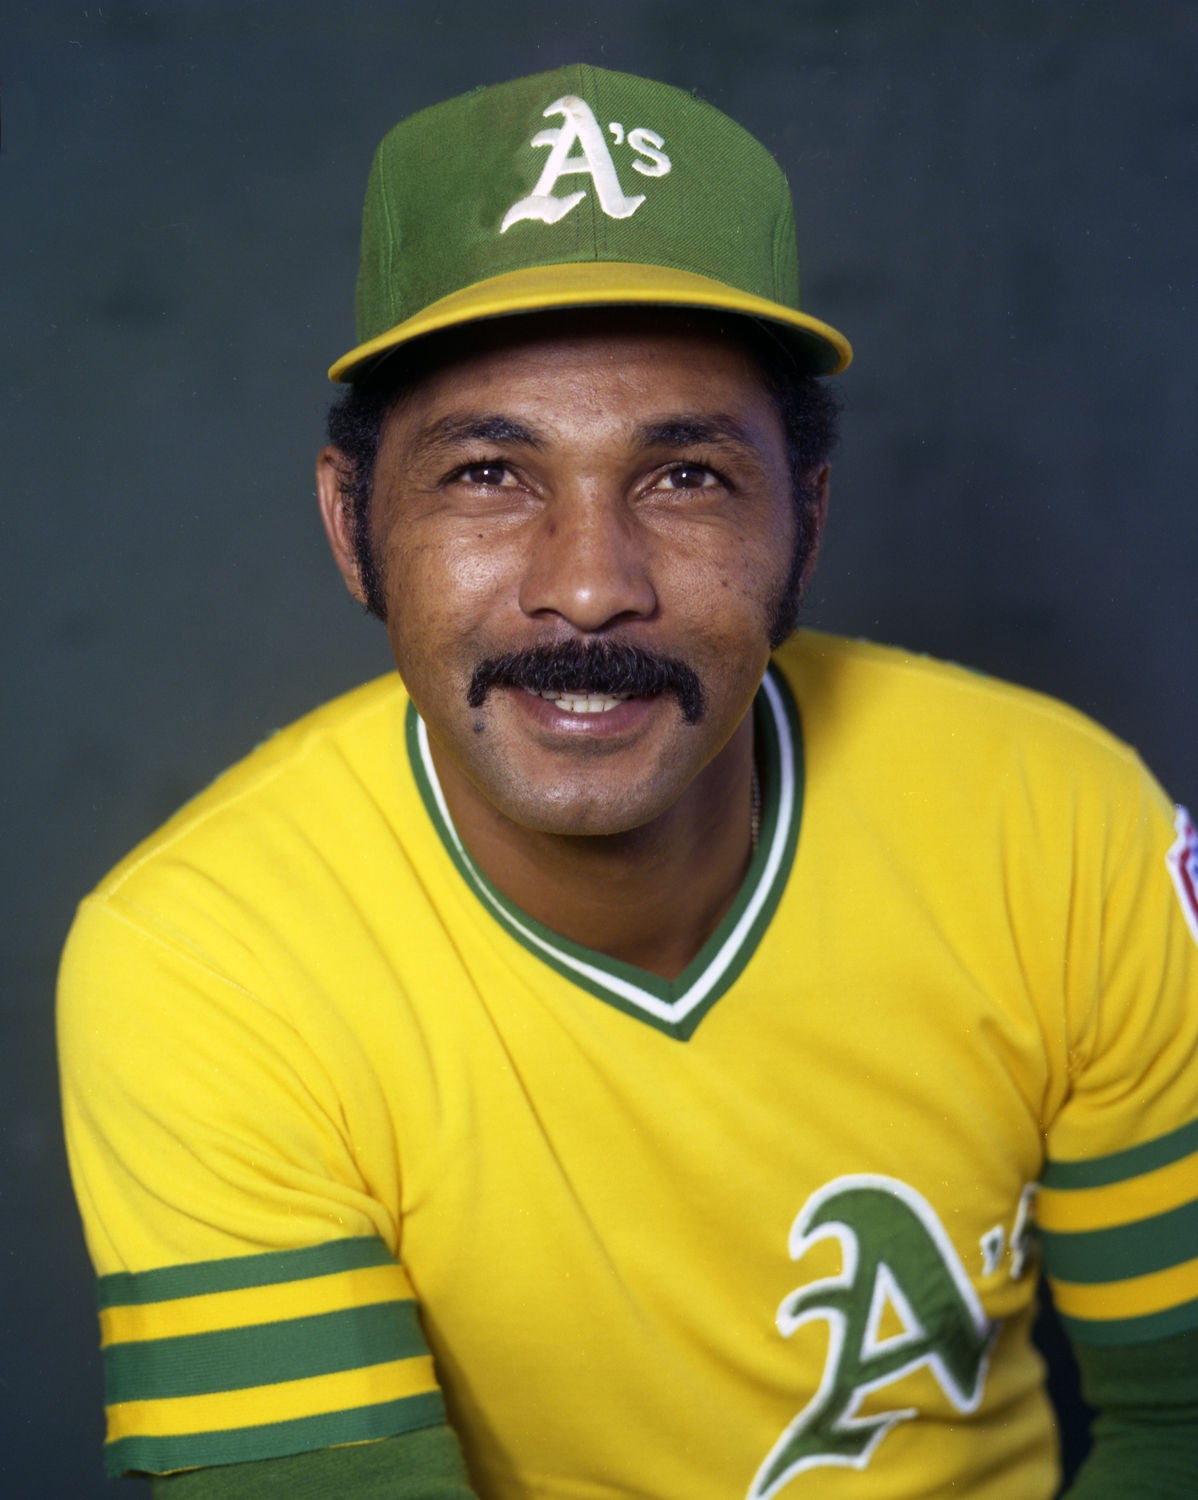 Cubs legend Billy Williams traded to 